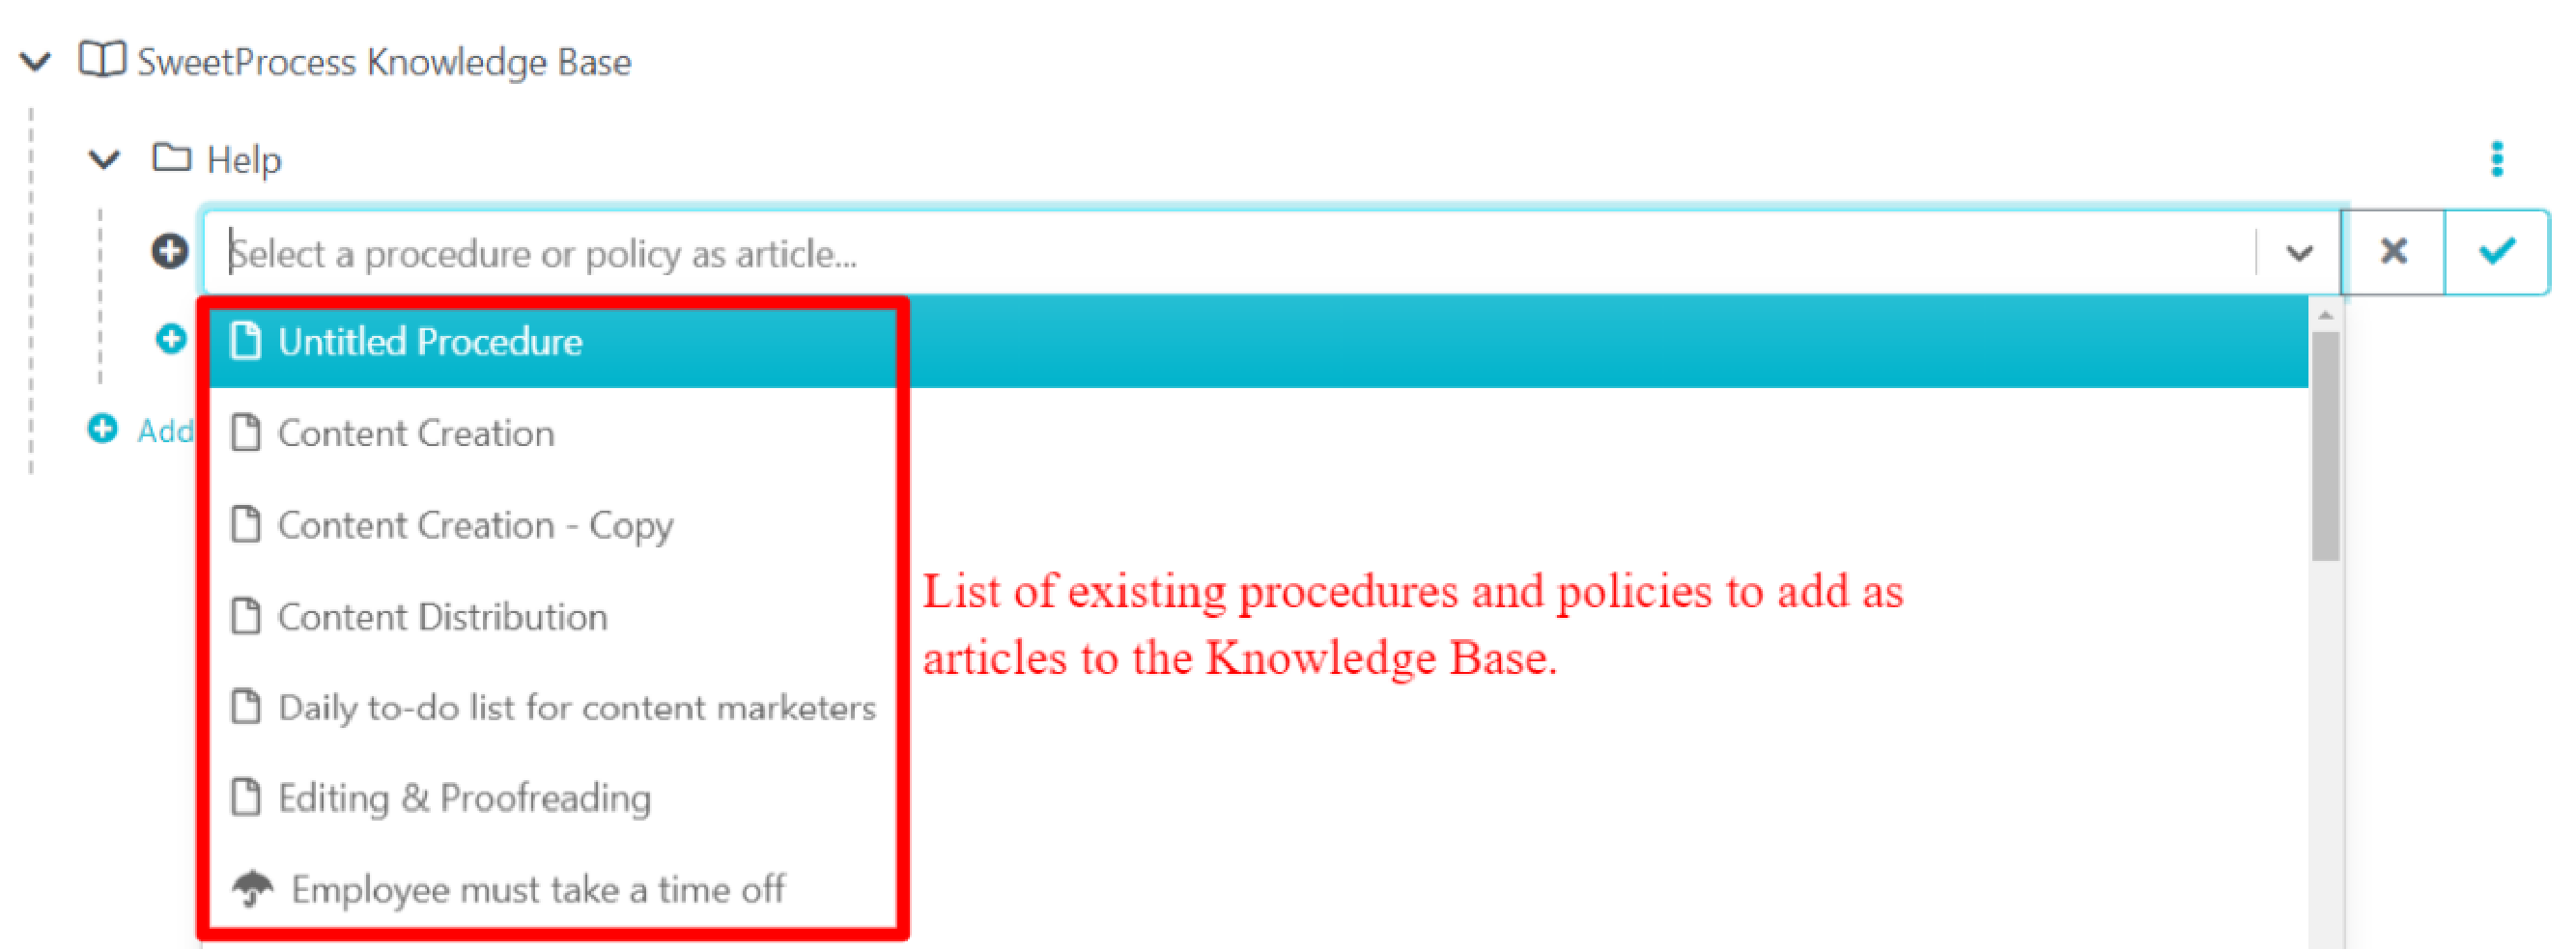 List of existing procedures and policies to add as articles to the Knowledge Base